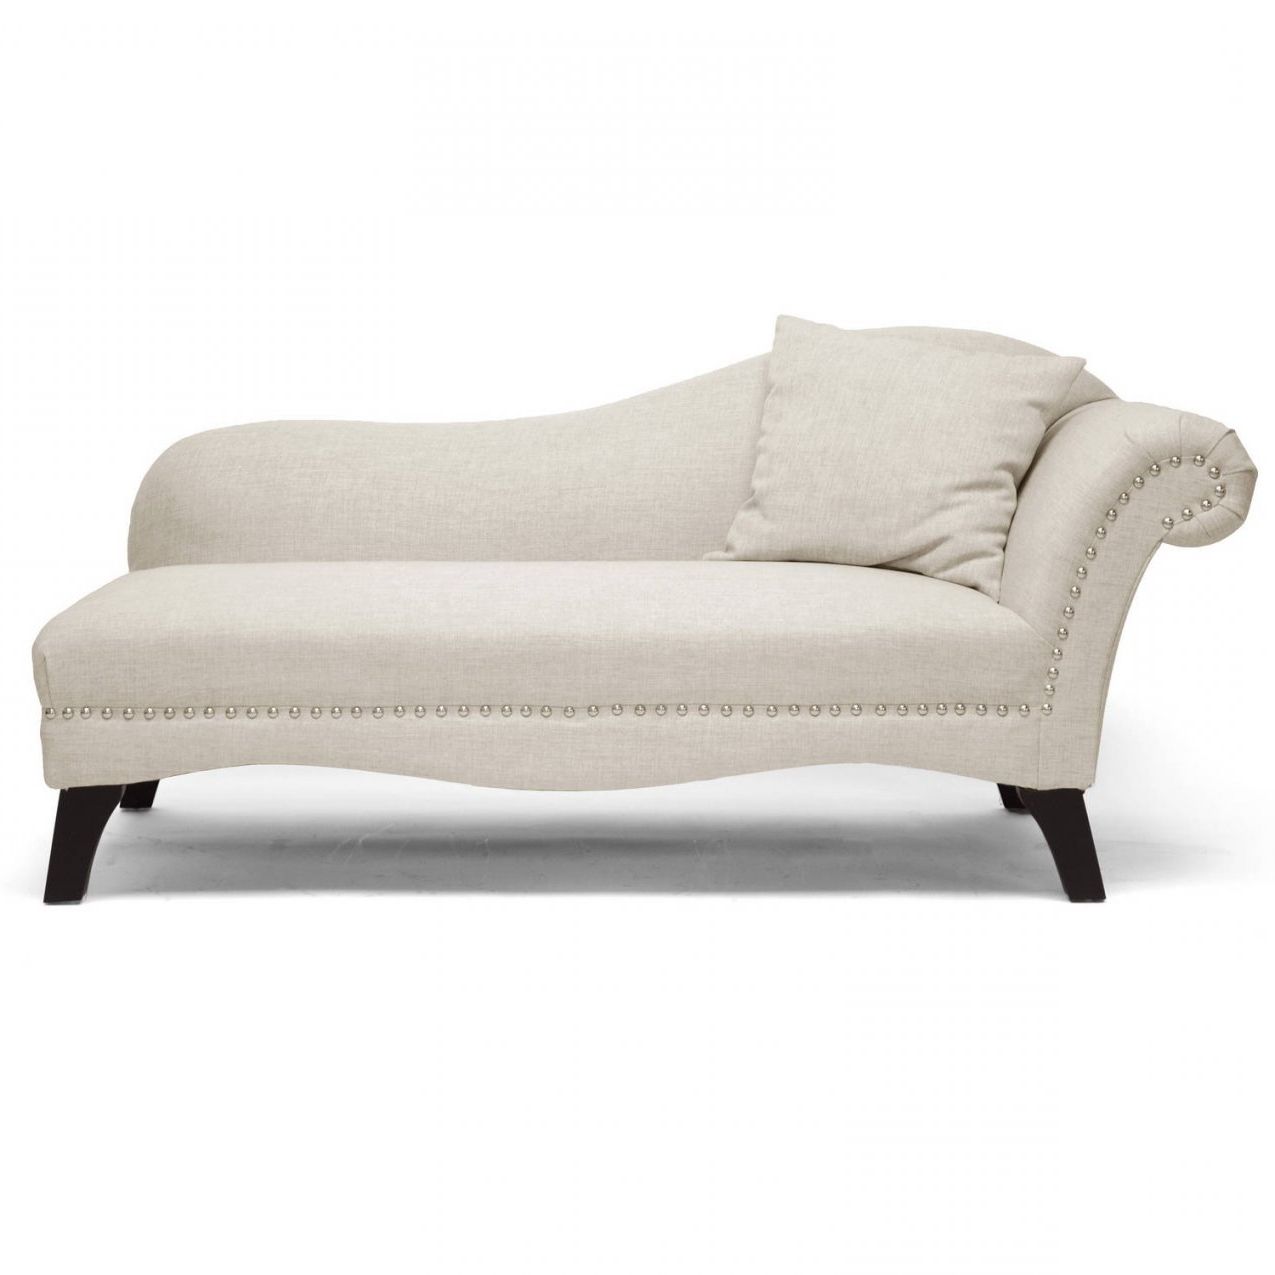 Most Up To Date Chaise Lounge Sofa With Regard To Loveseat Chaise Lounges (View 1 of 15)